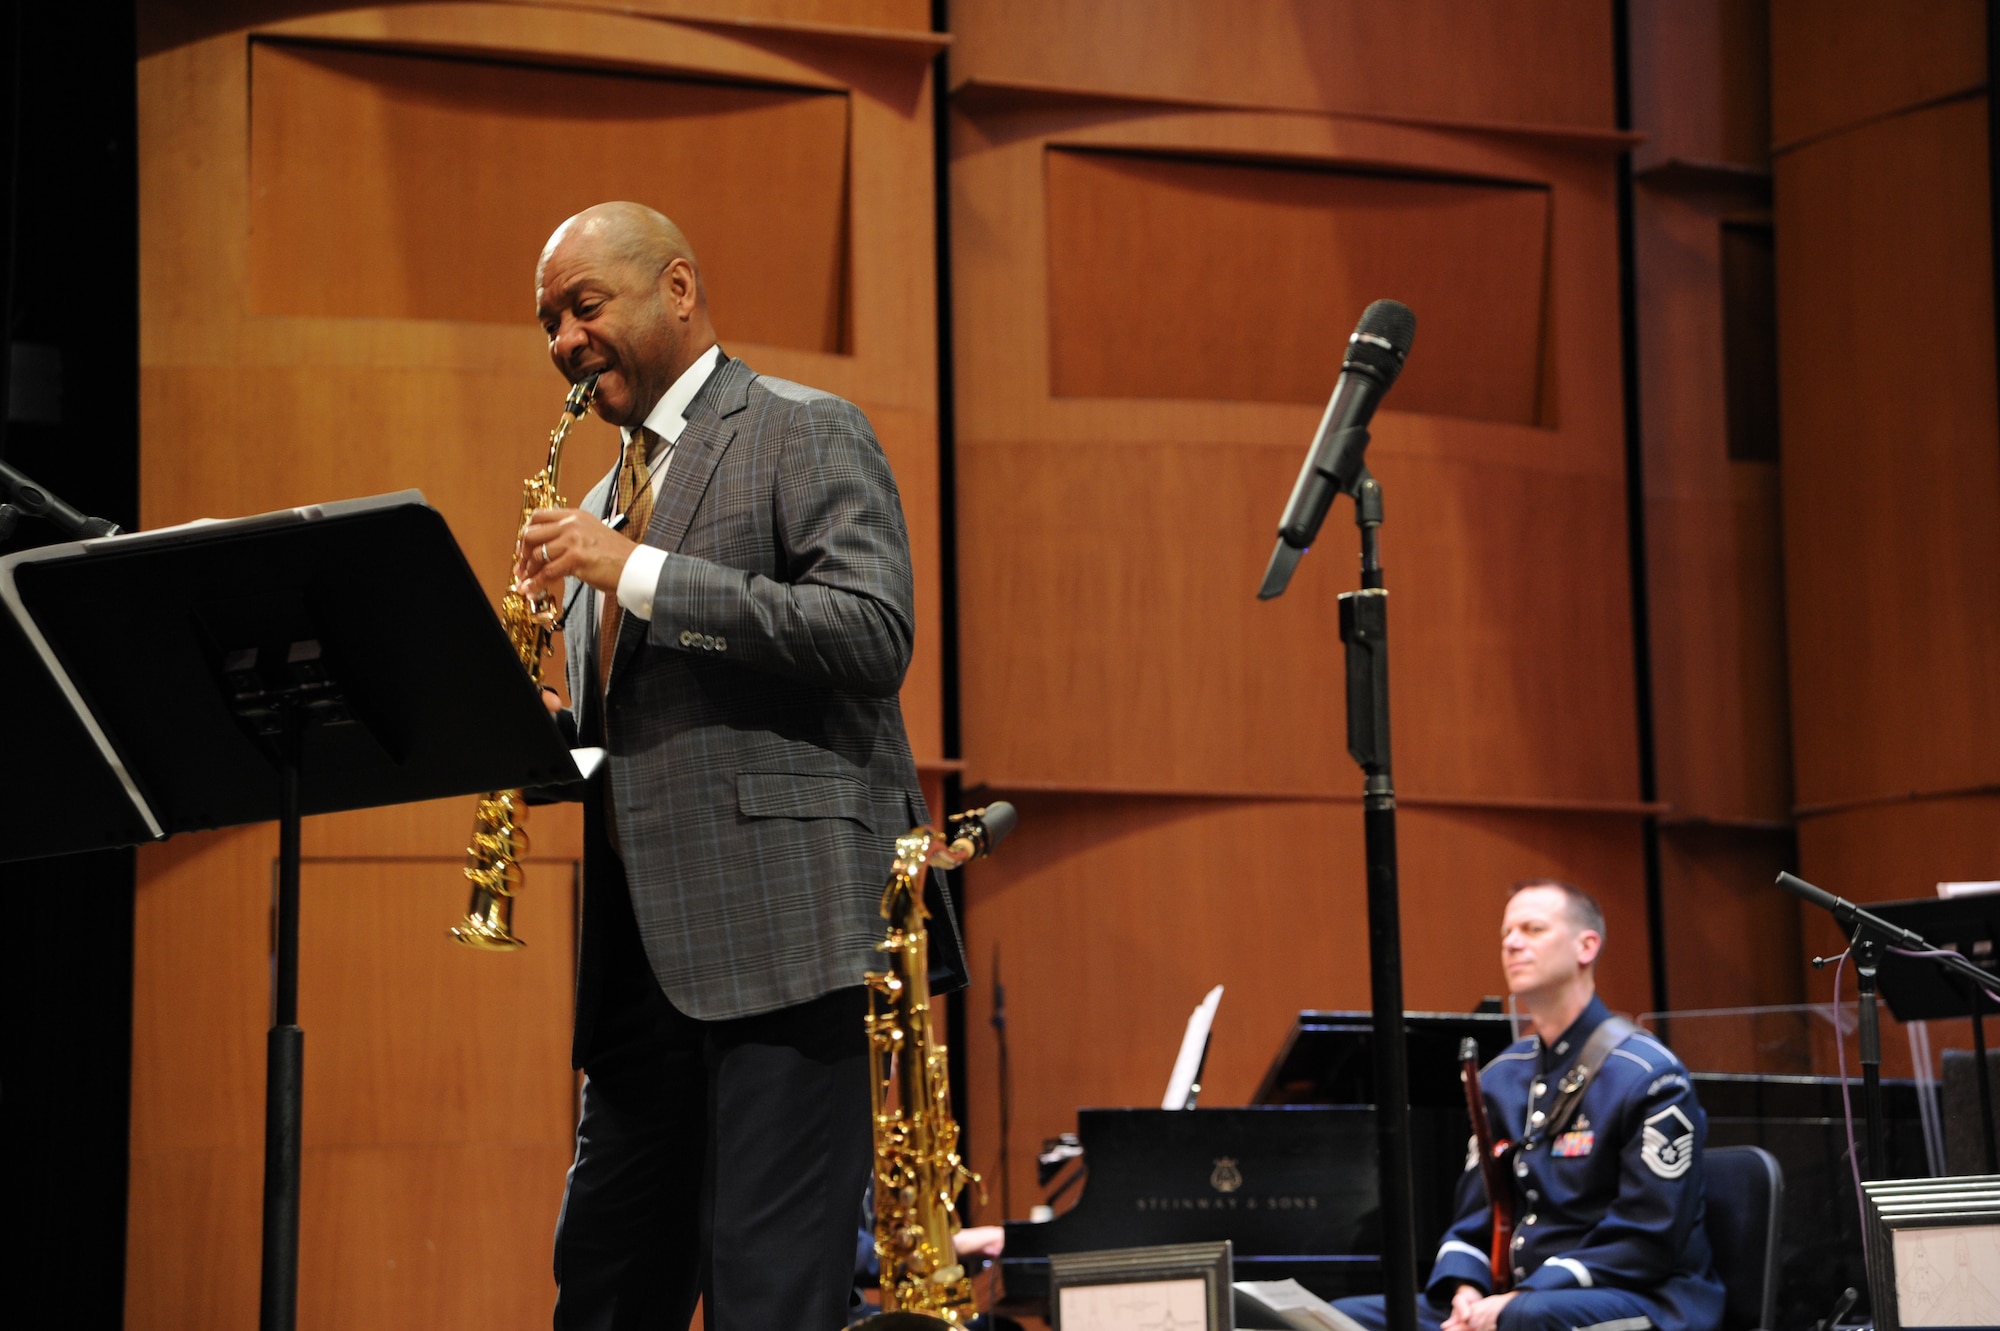 The Air Force Band's premiere jazz ensemble welcomes a jazz artist to sit in with the troupe and bring a unique concert opportunity to the public.